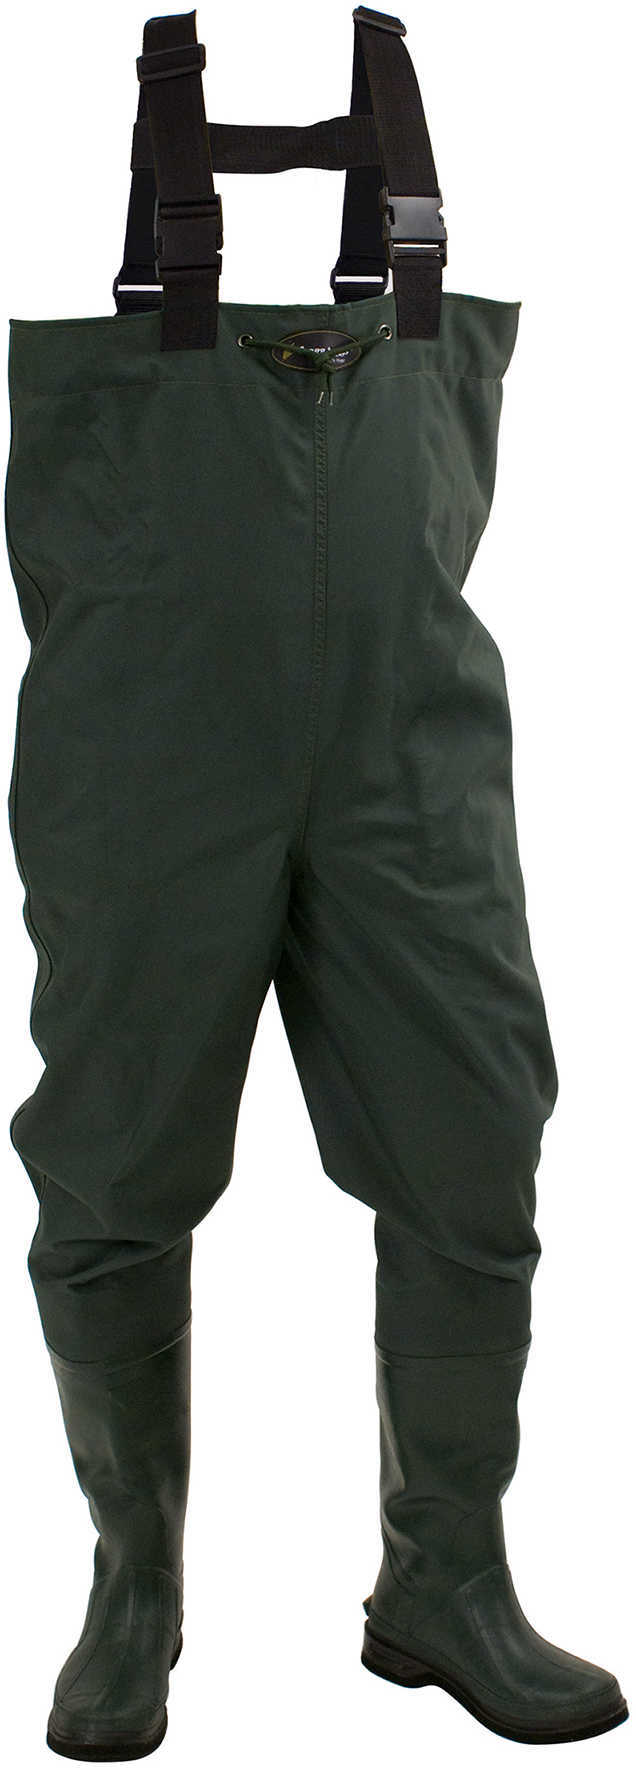 Frogg Toggs Wader Forest Green Cleated Size 10 271524310